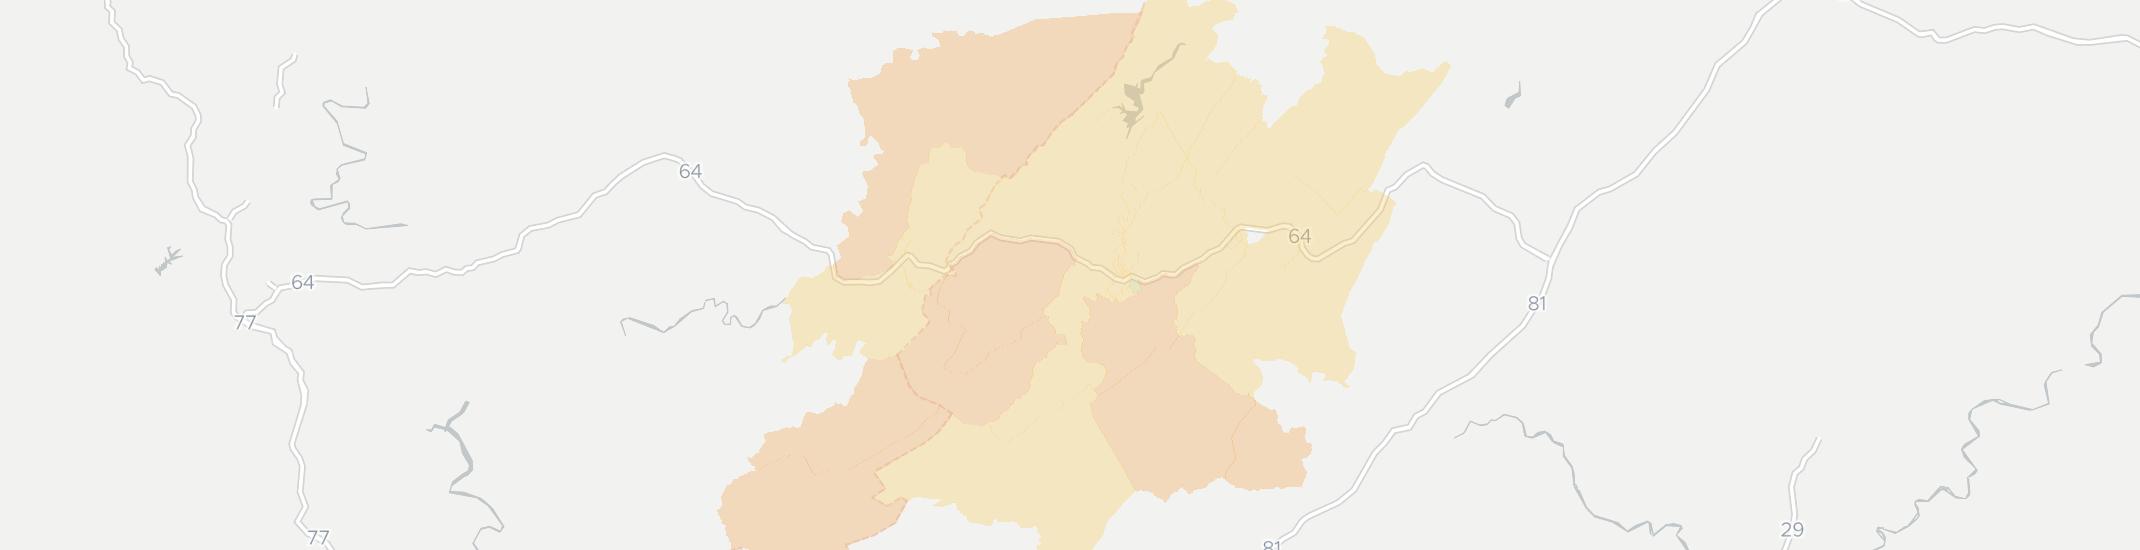 Covington Internet Competition Map. Click for interactive map.